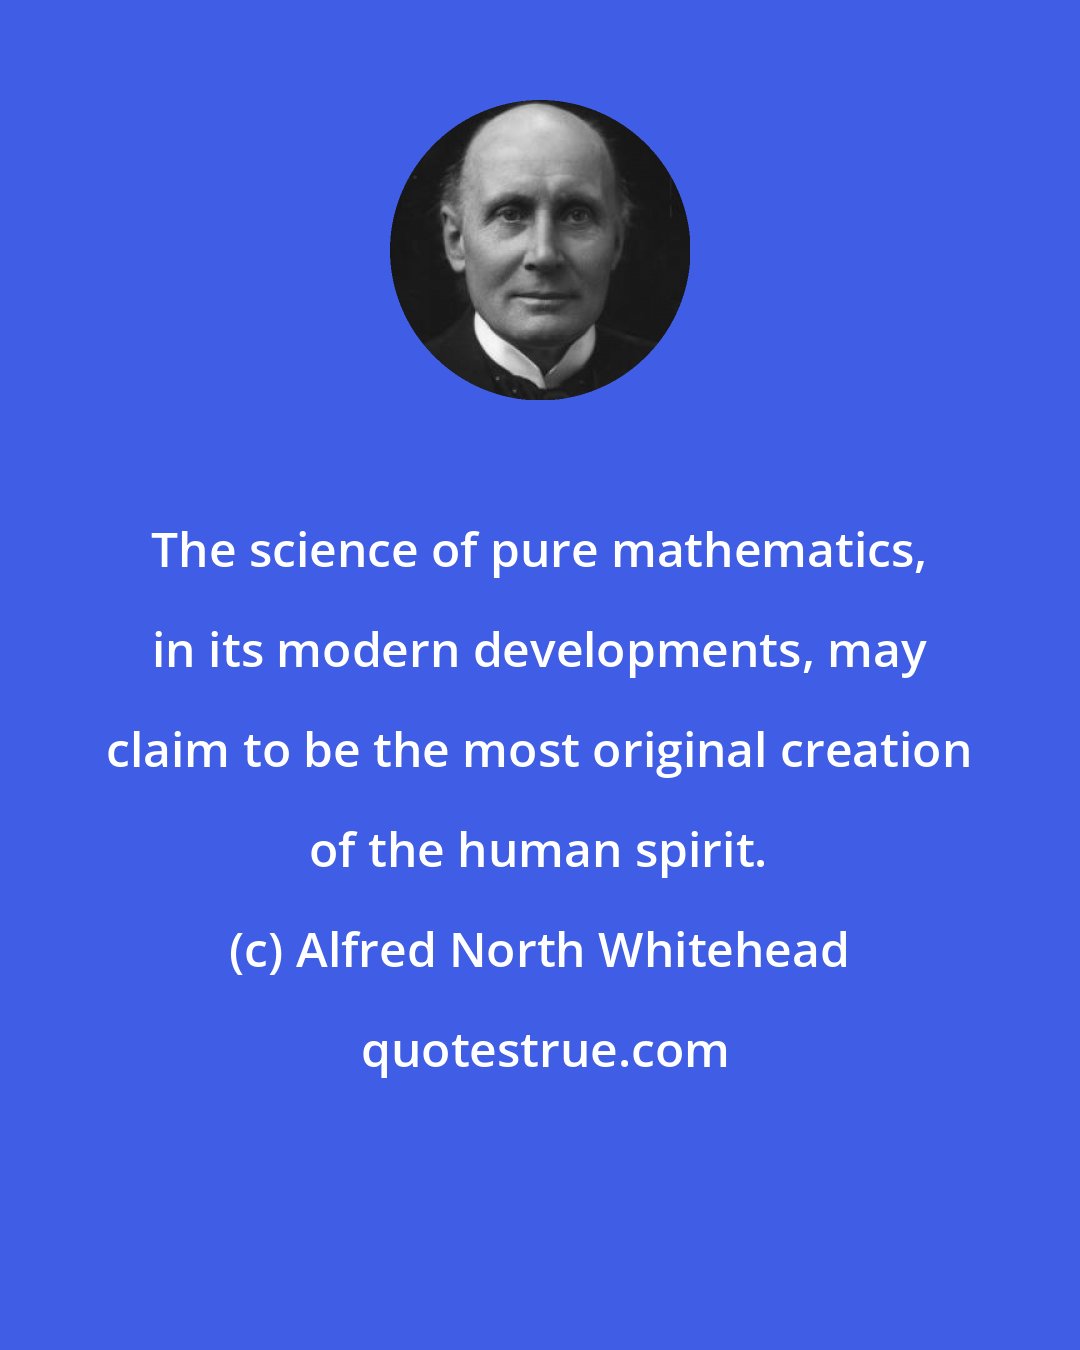 Alfred North Whitehead: The science of pure mathematics, in its modern developments, may claim to be the most original creation of the human spirit.